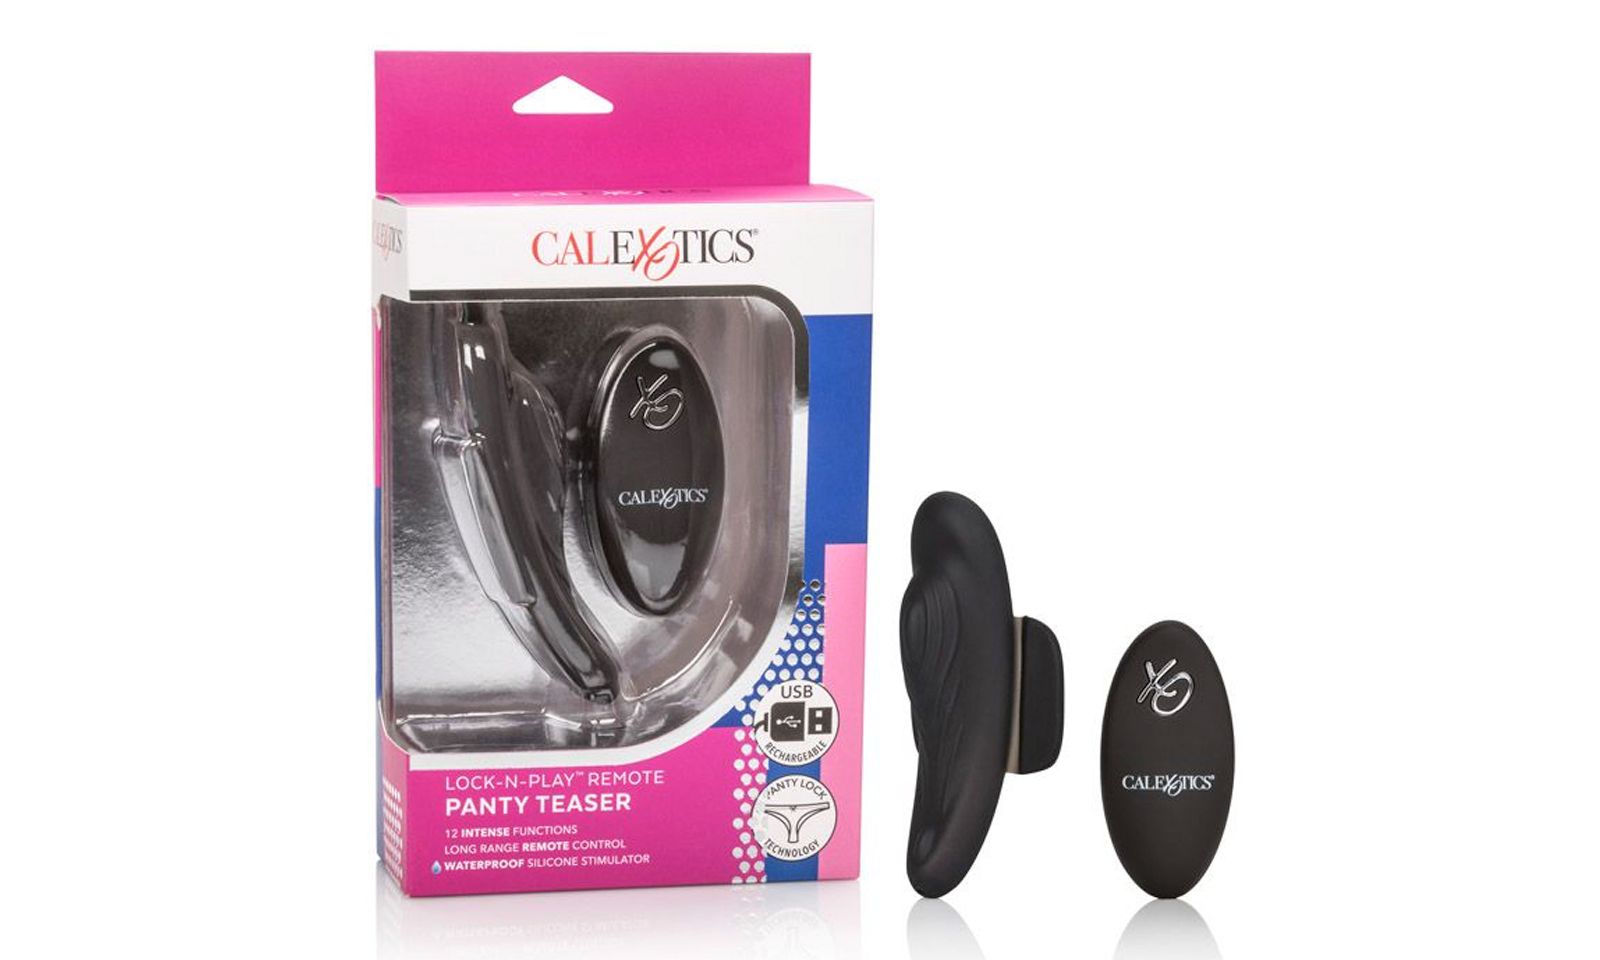 Pleasure in Just the Right Spot with CalExotics’ Lock-N-Play Panty Teasers